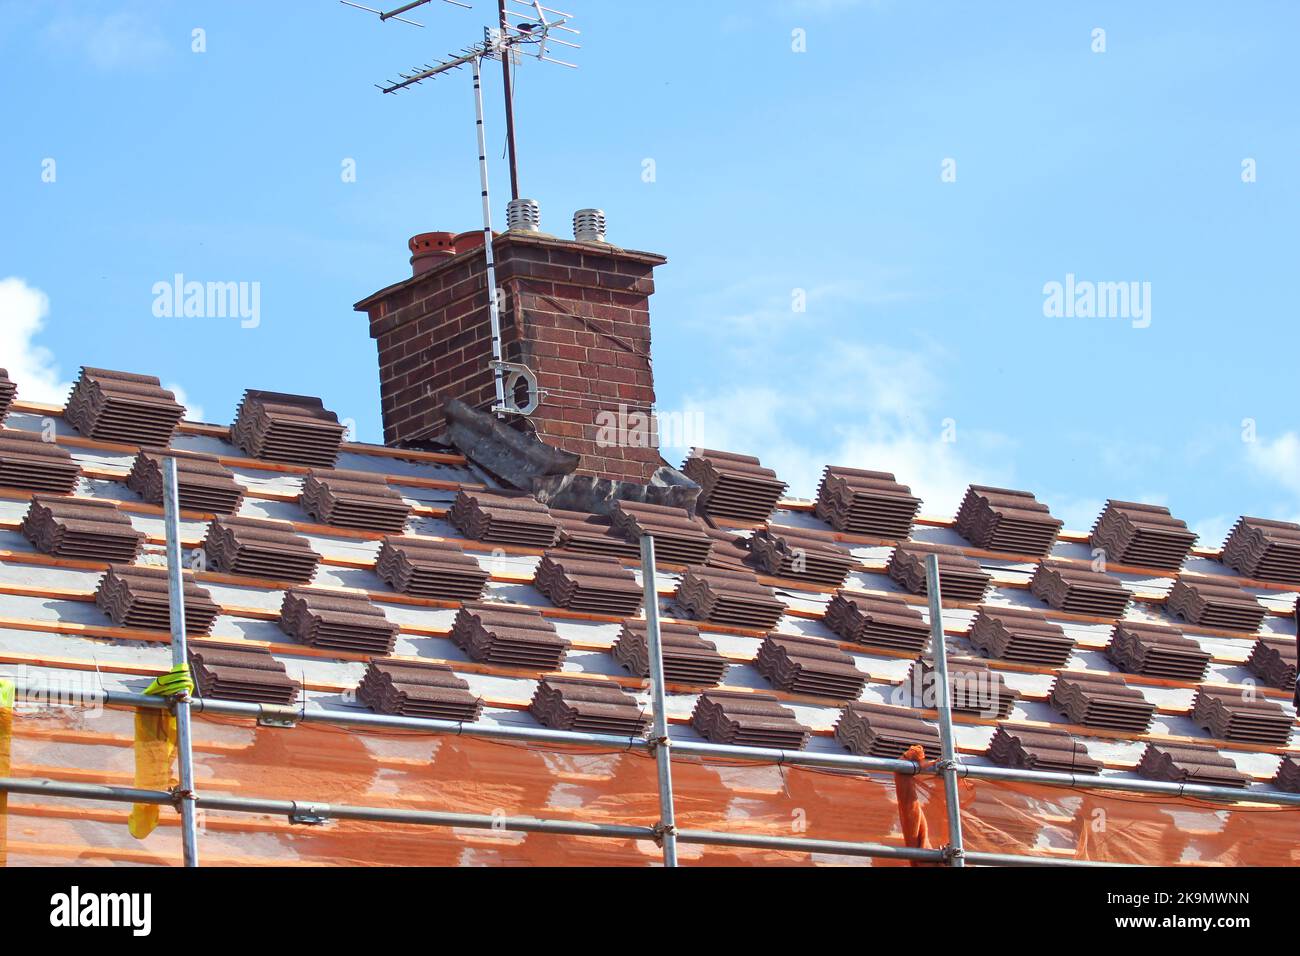 Workers on town house roof removing old slates / no safety equipment or  helmets - France Stock Photo - Alamy